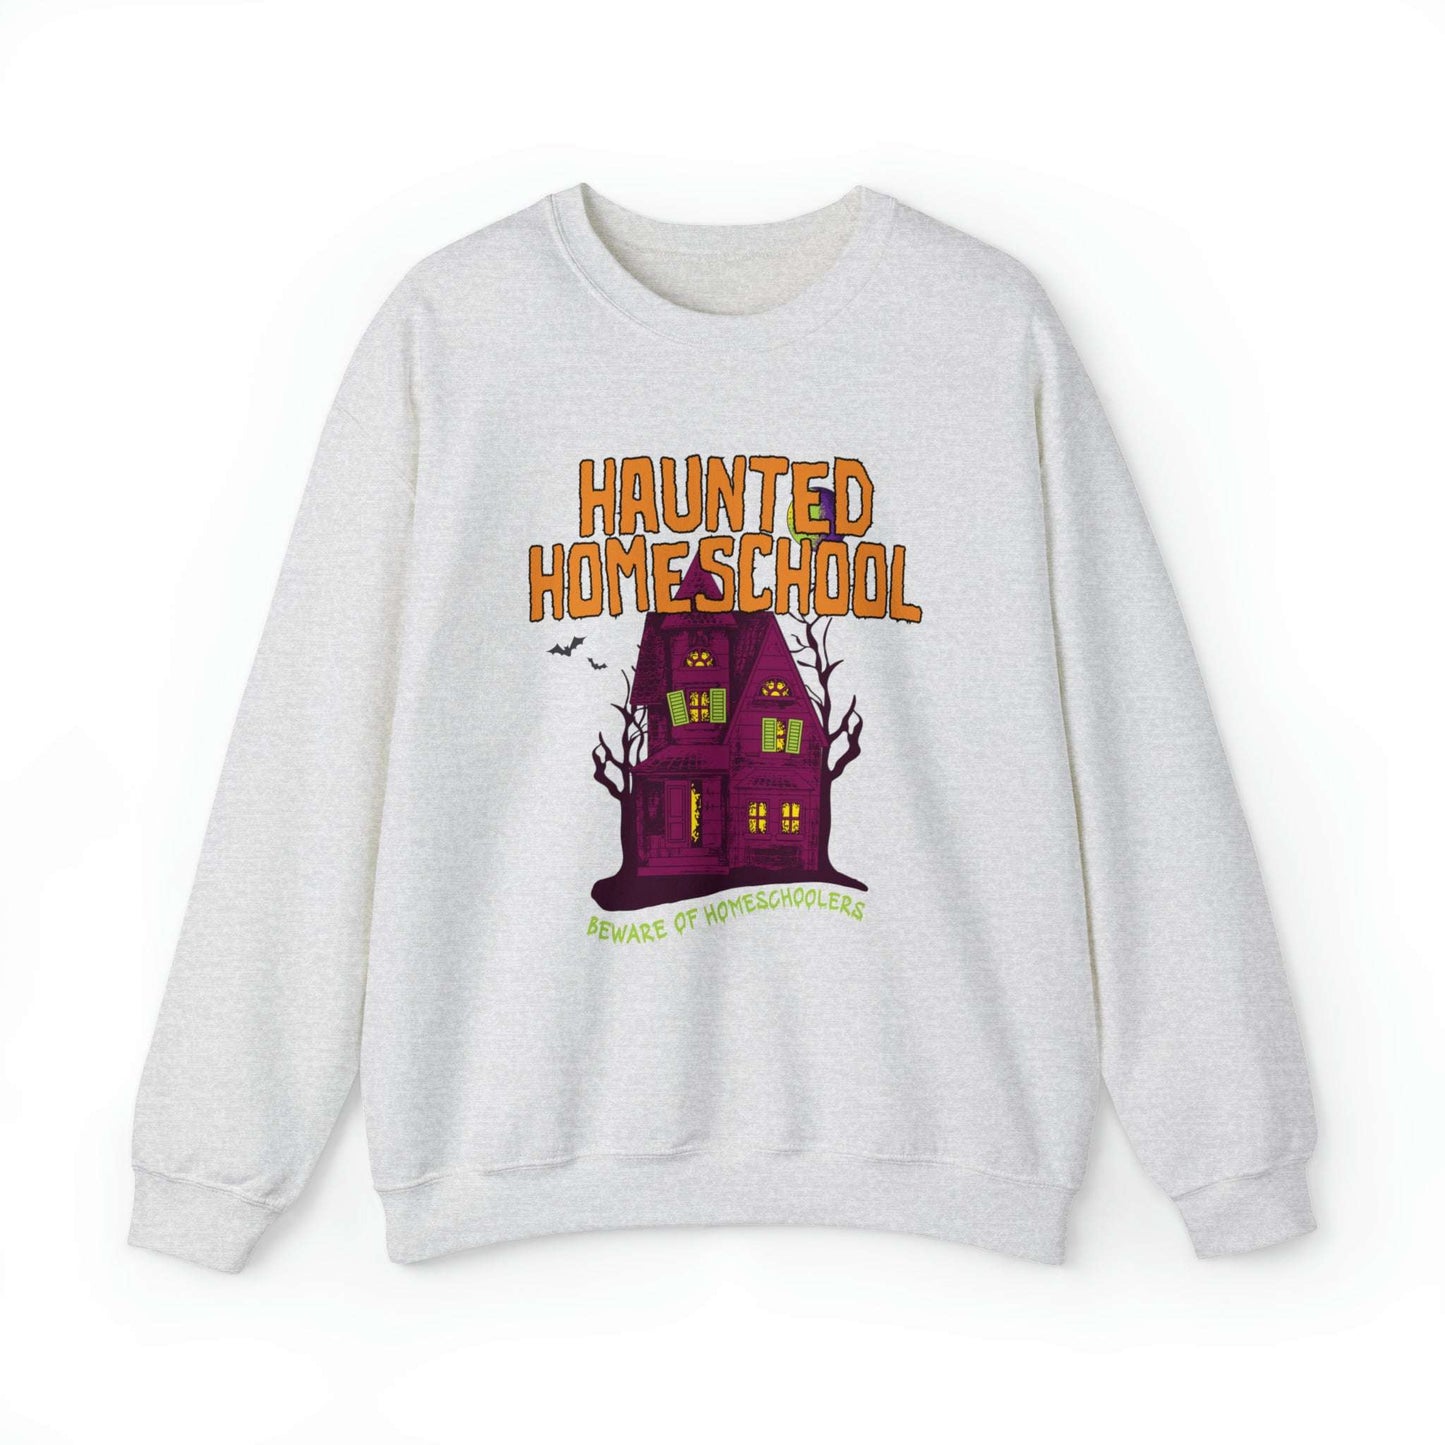 Haunted Homeschool Adult Crewneck SweatshirtWolfe Paw DesignsHaunted Homeschool Adult Crewneck SweatshirtBeware of homeschoolers!
Also available as a tee.
Gildan Unisex Fit
50% cotton, 50% polyester



 
S
M
L
XL
2XL
3XL
4XL
5XL




Width, in
20.00
22.01
24.00
26.00
28.Haunted Homeschool Adult Crewneck Sweatshirt